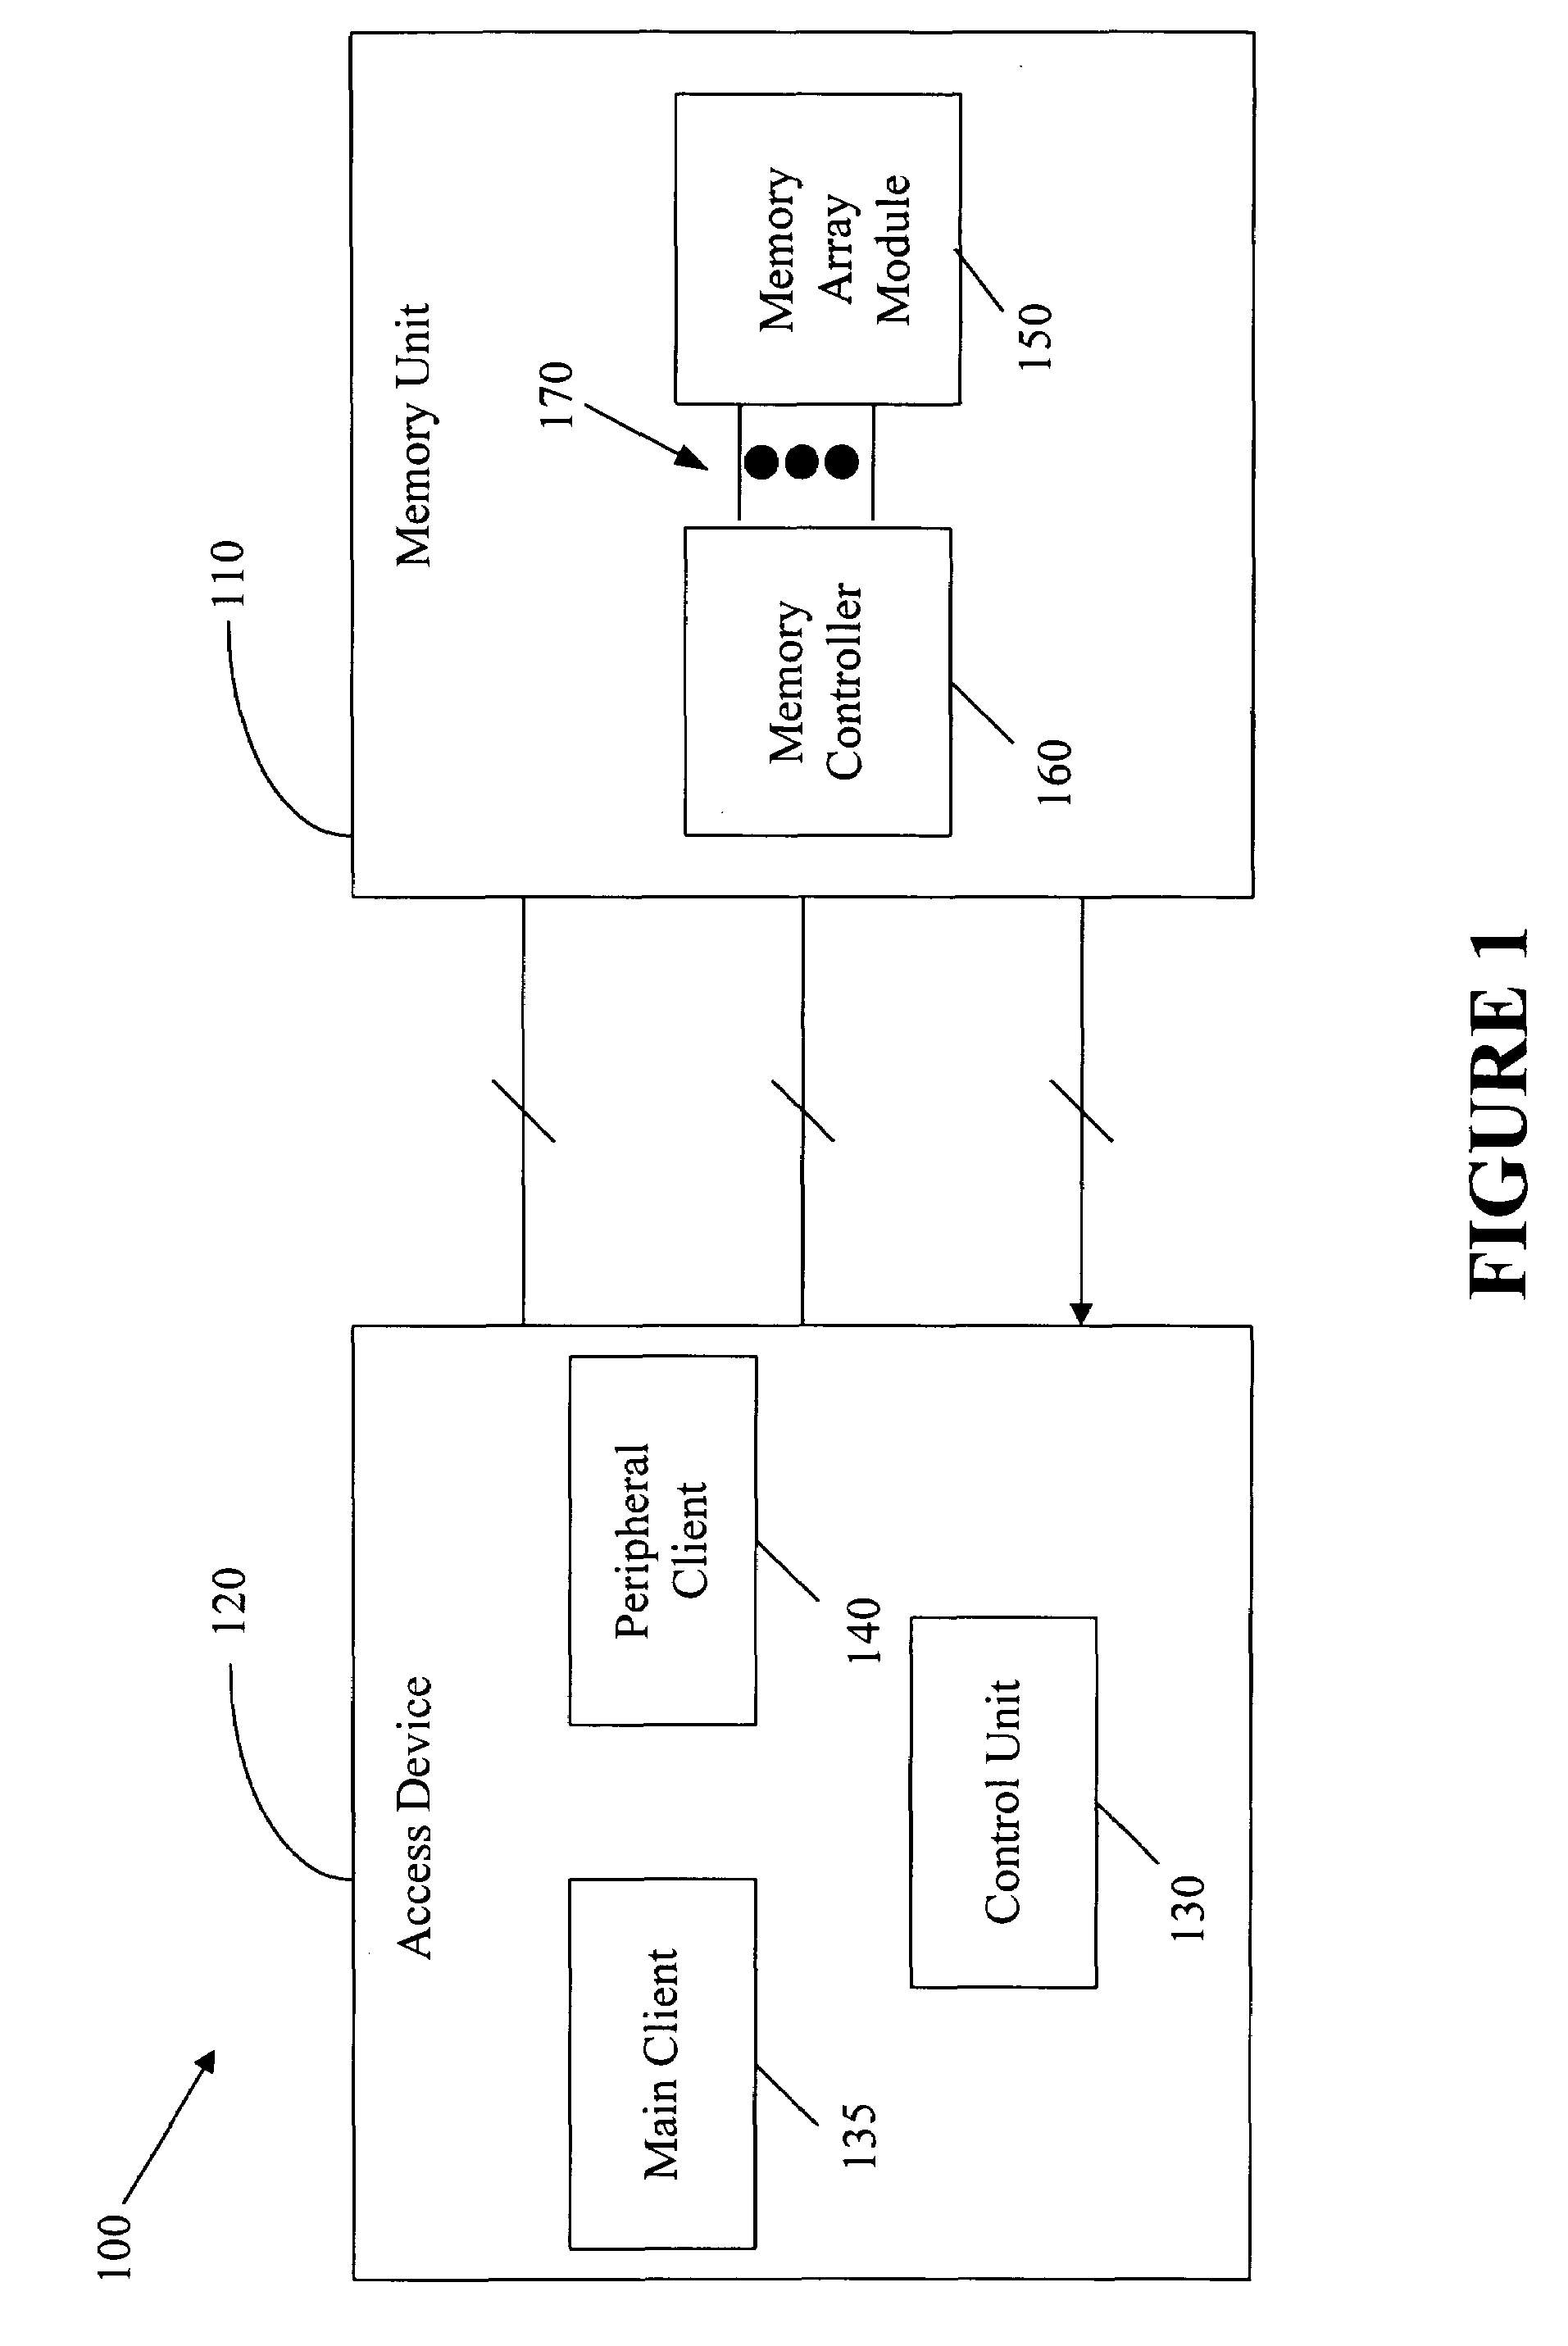 Method and apparatus for accessing a dynamic memory device by providing at least one of burst and latency information over at least one of redundant row and column address lines